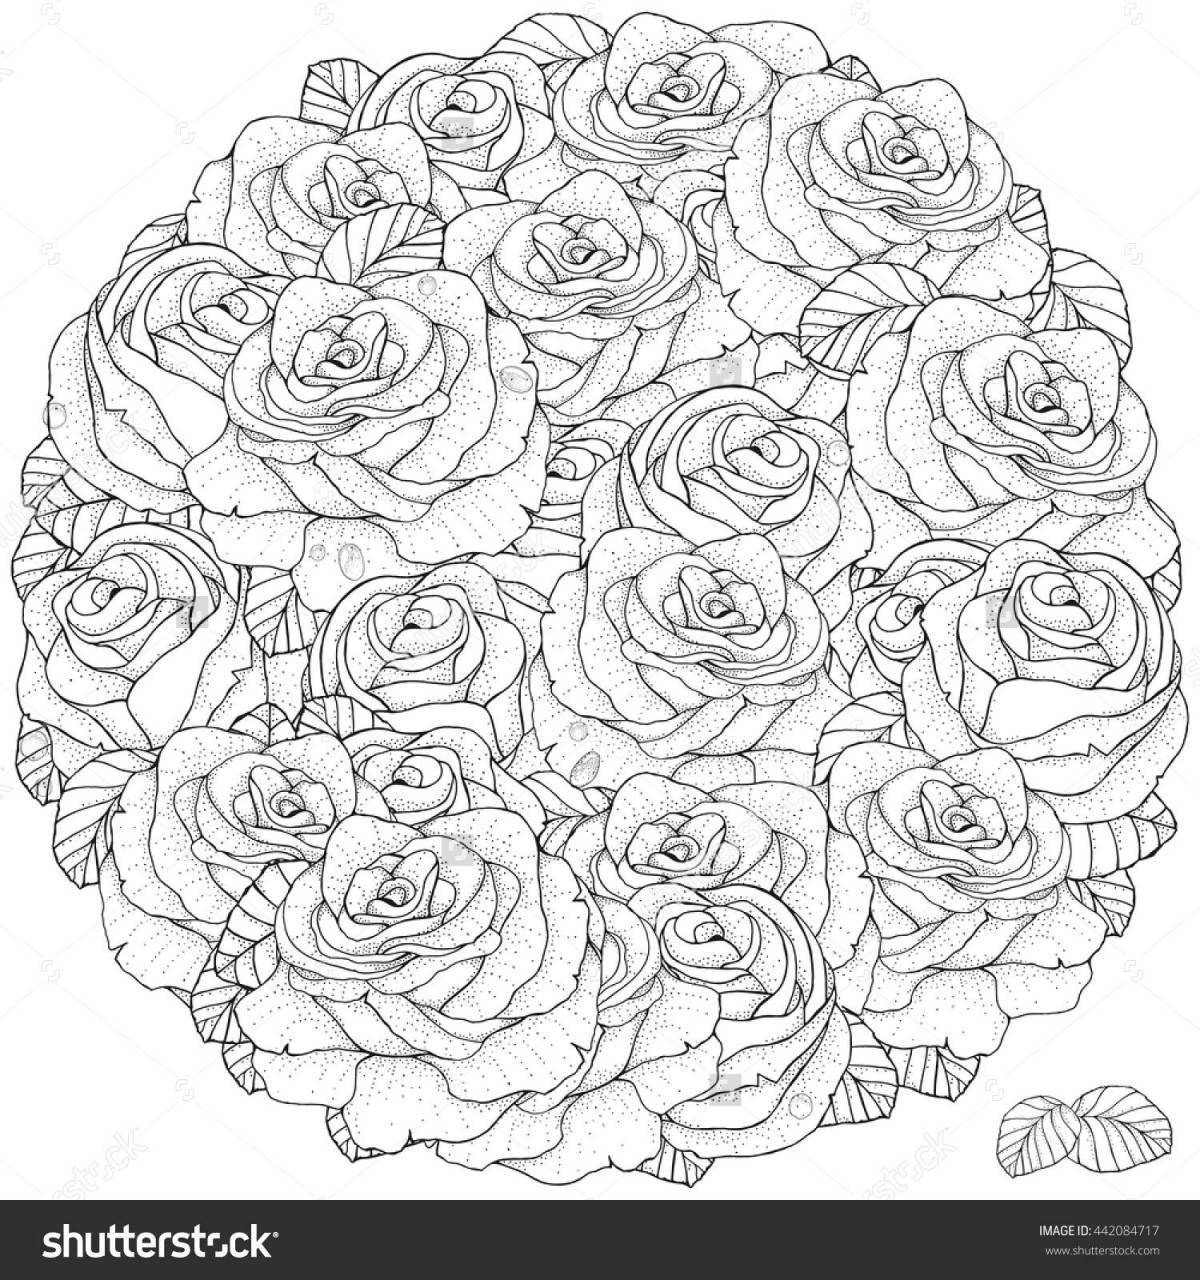 Charming rose coloring by numbers